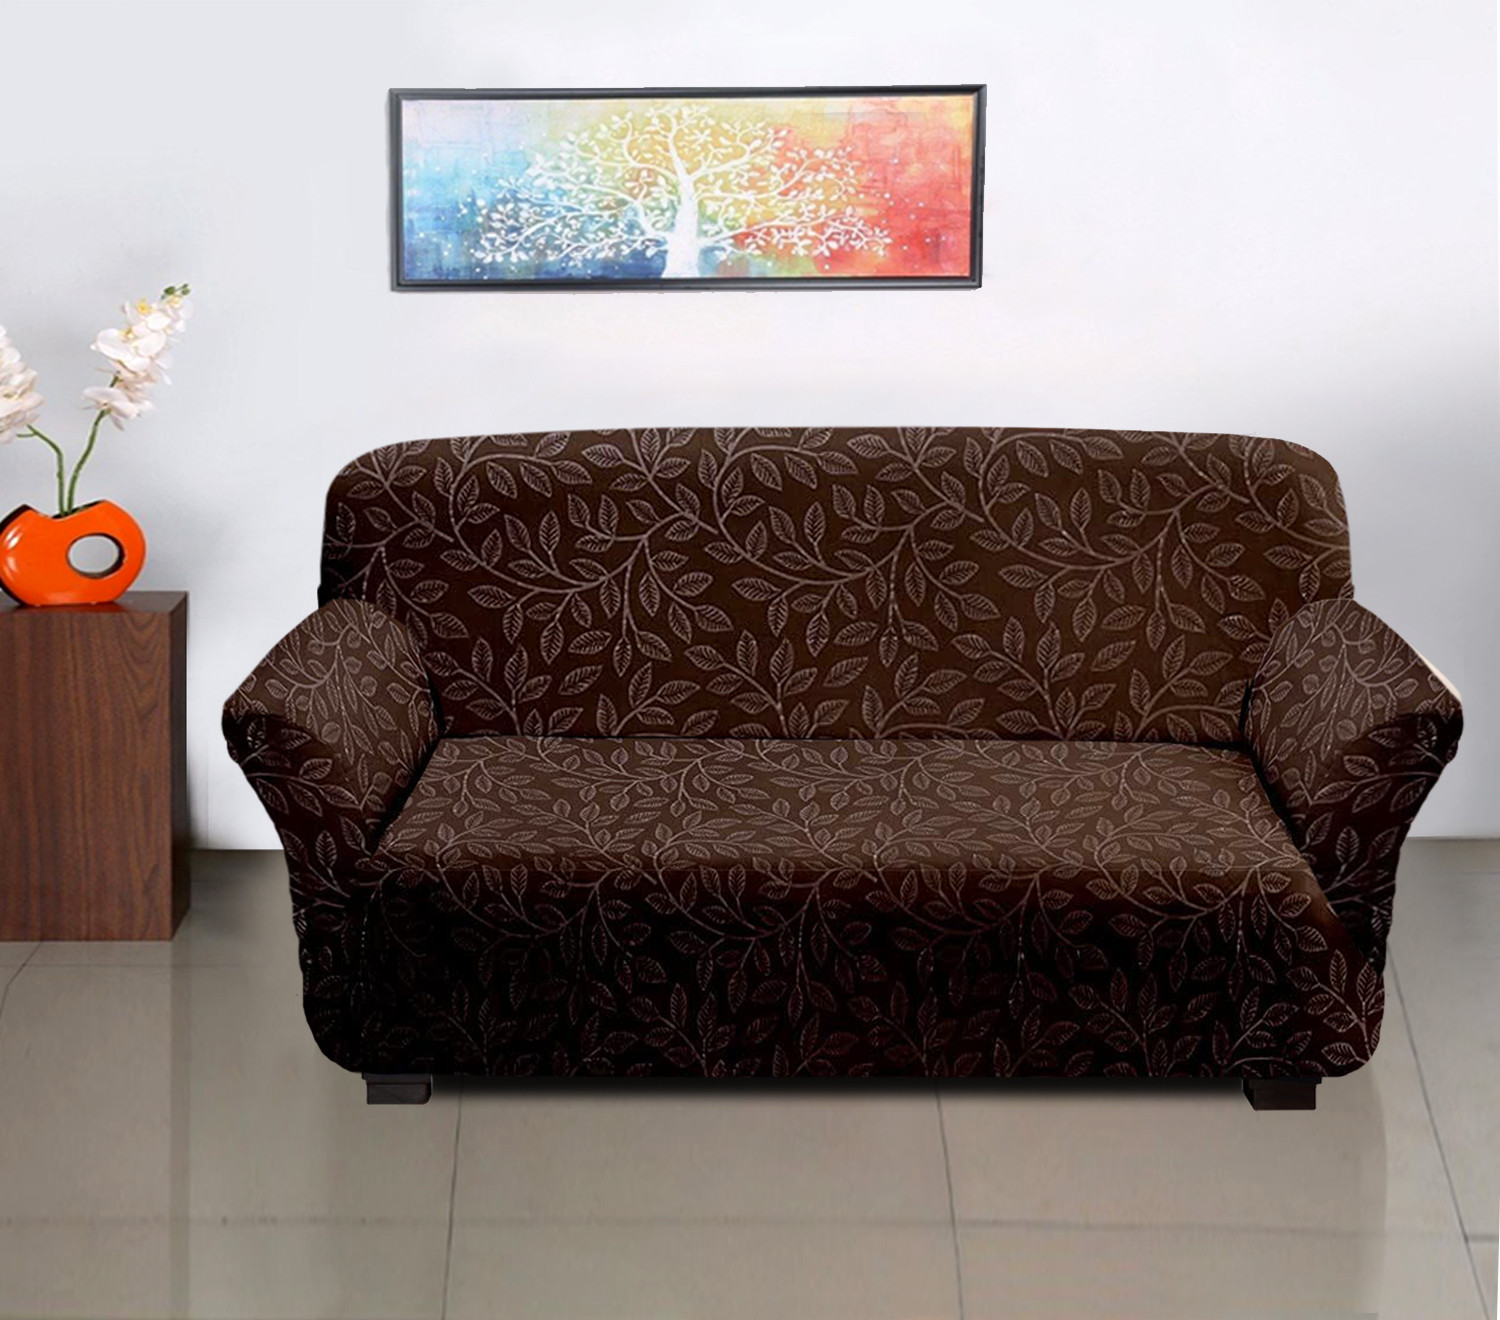 Kuber Industries Leaf Printed Stretchable, Non-Slip Polyster 3 Seater Sofa Cover/Slipcover/Protector With Foam Stick (Brown)